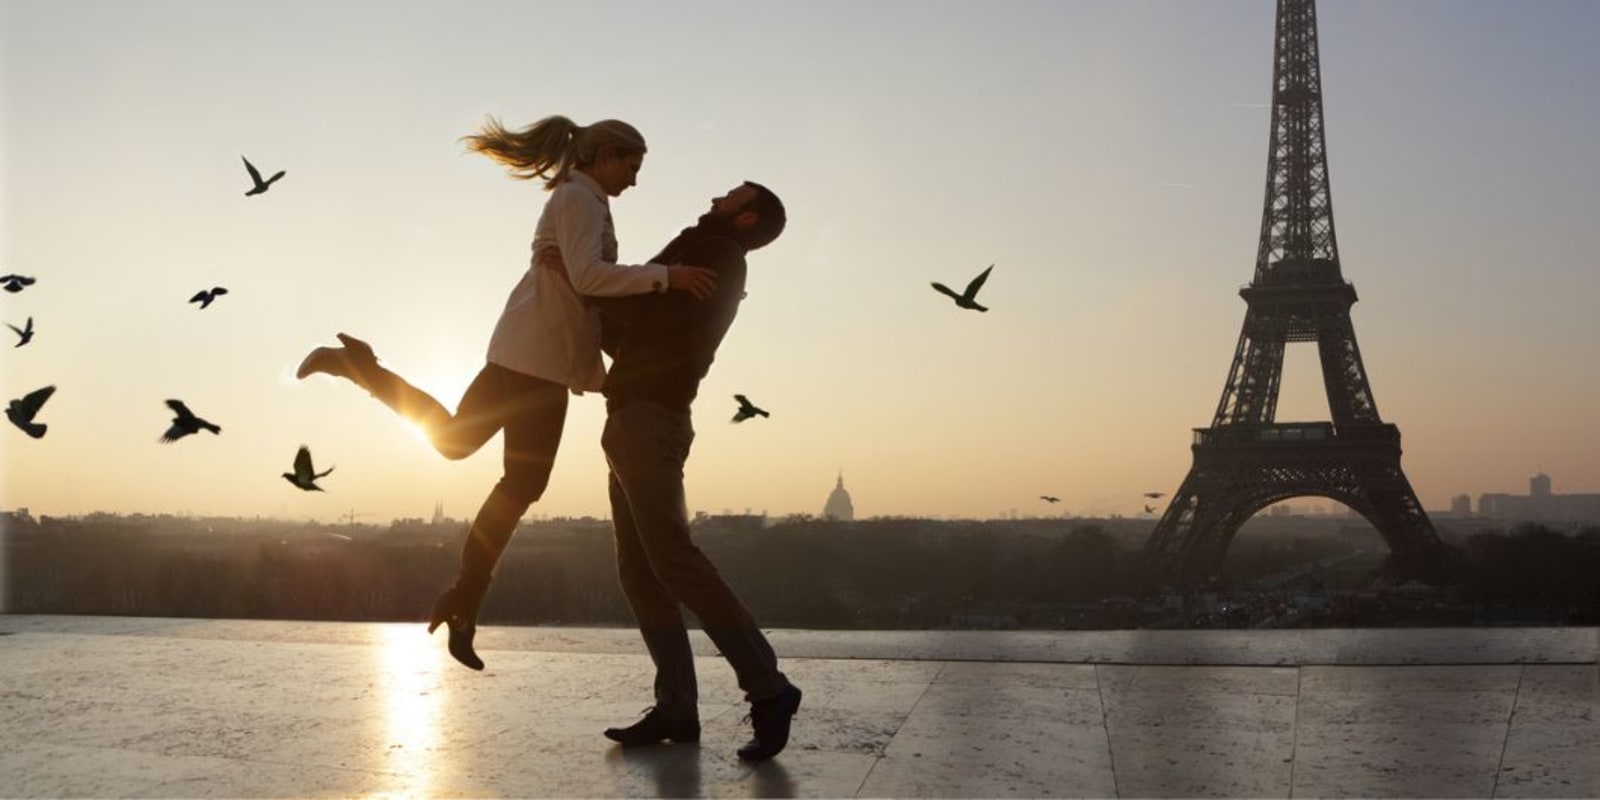 A couple dancing romantically in front of the Eiffel Tower.